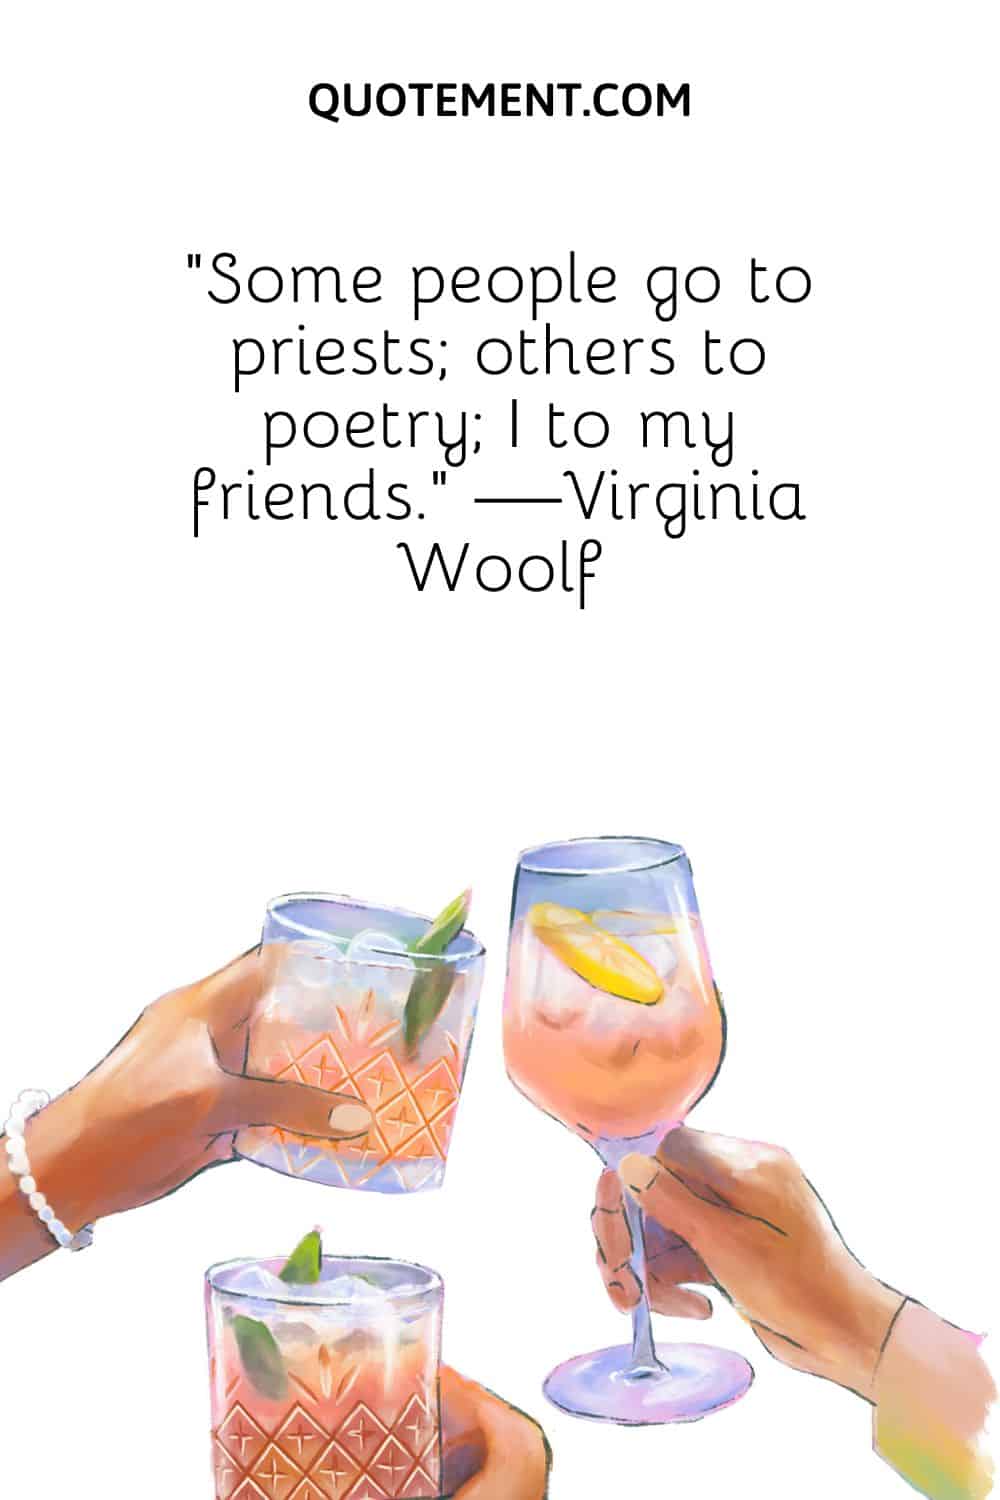 Some people go to priests; others to poetry; I to my friends. —Virginia Woolf